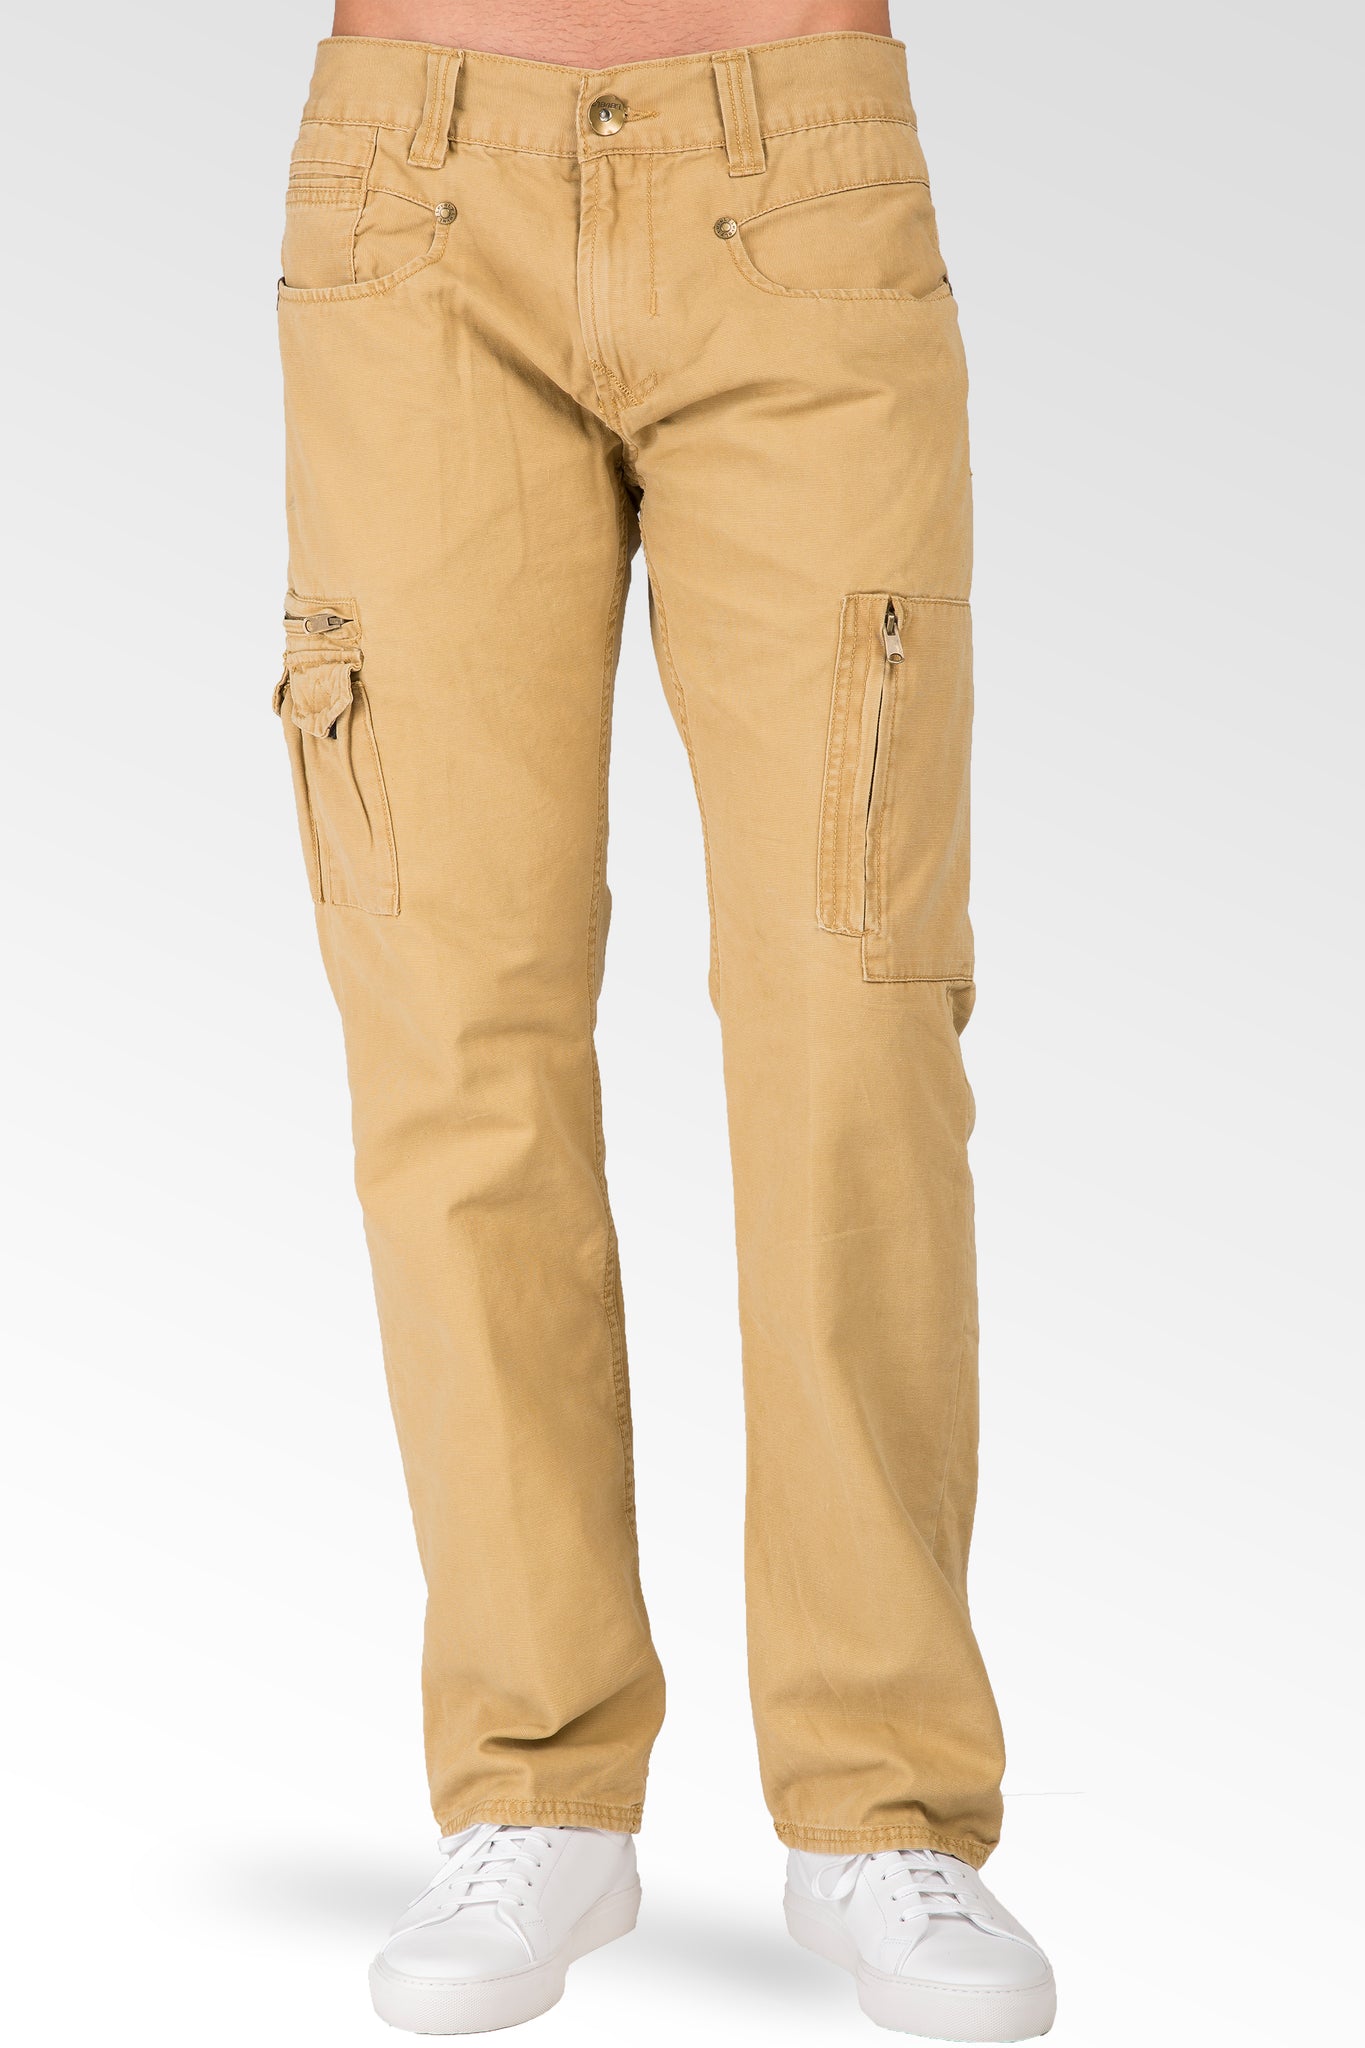 Relaxed Straight Tan Garment Washed Premium Canvas Utility Jeans Cargo Zipper Pockets